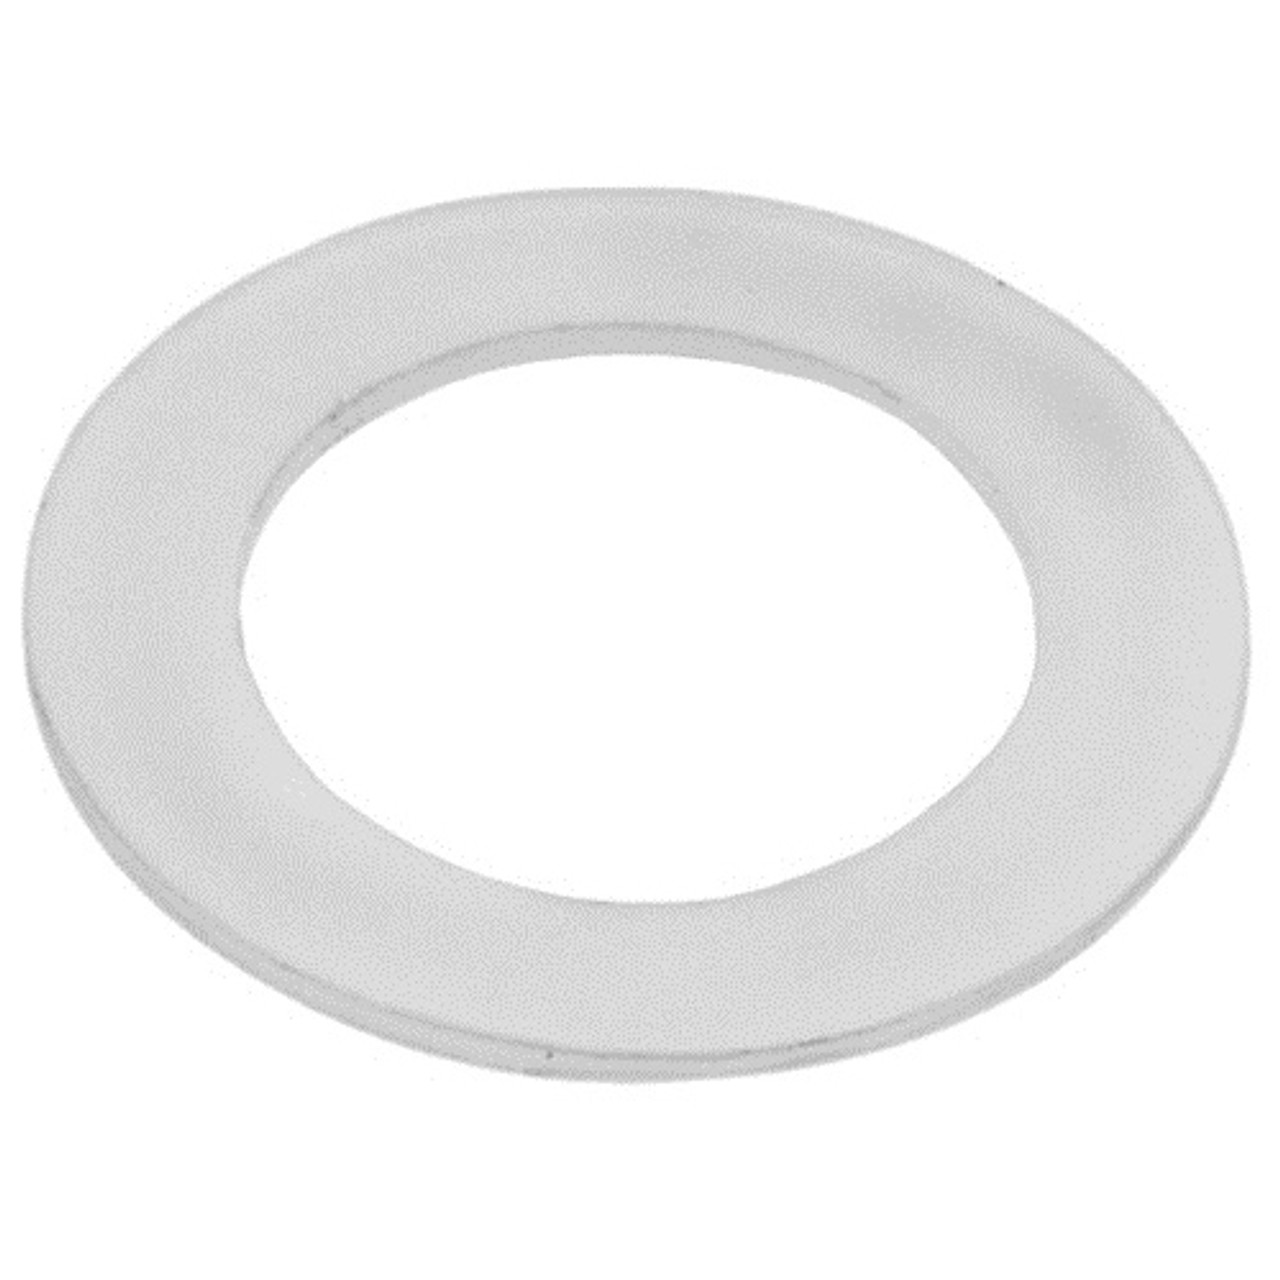 Saniserve Washer For Rear Seal - Replacement Part For Saniserv 107235